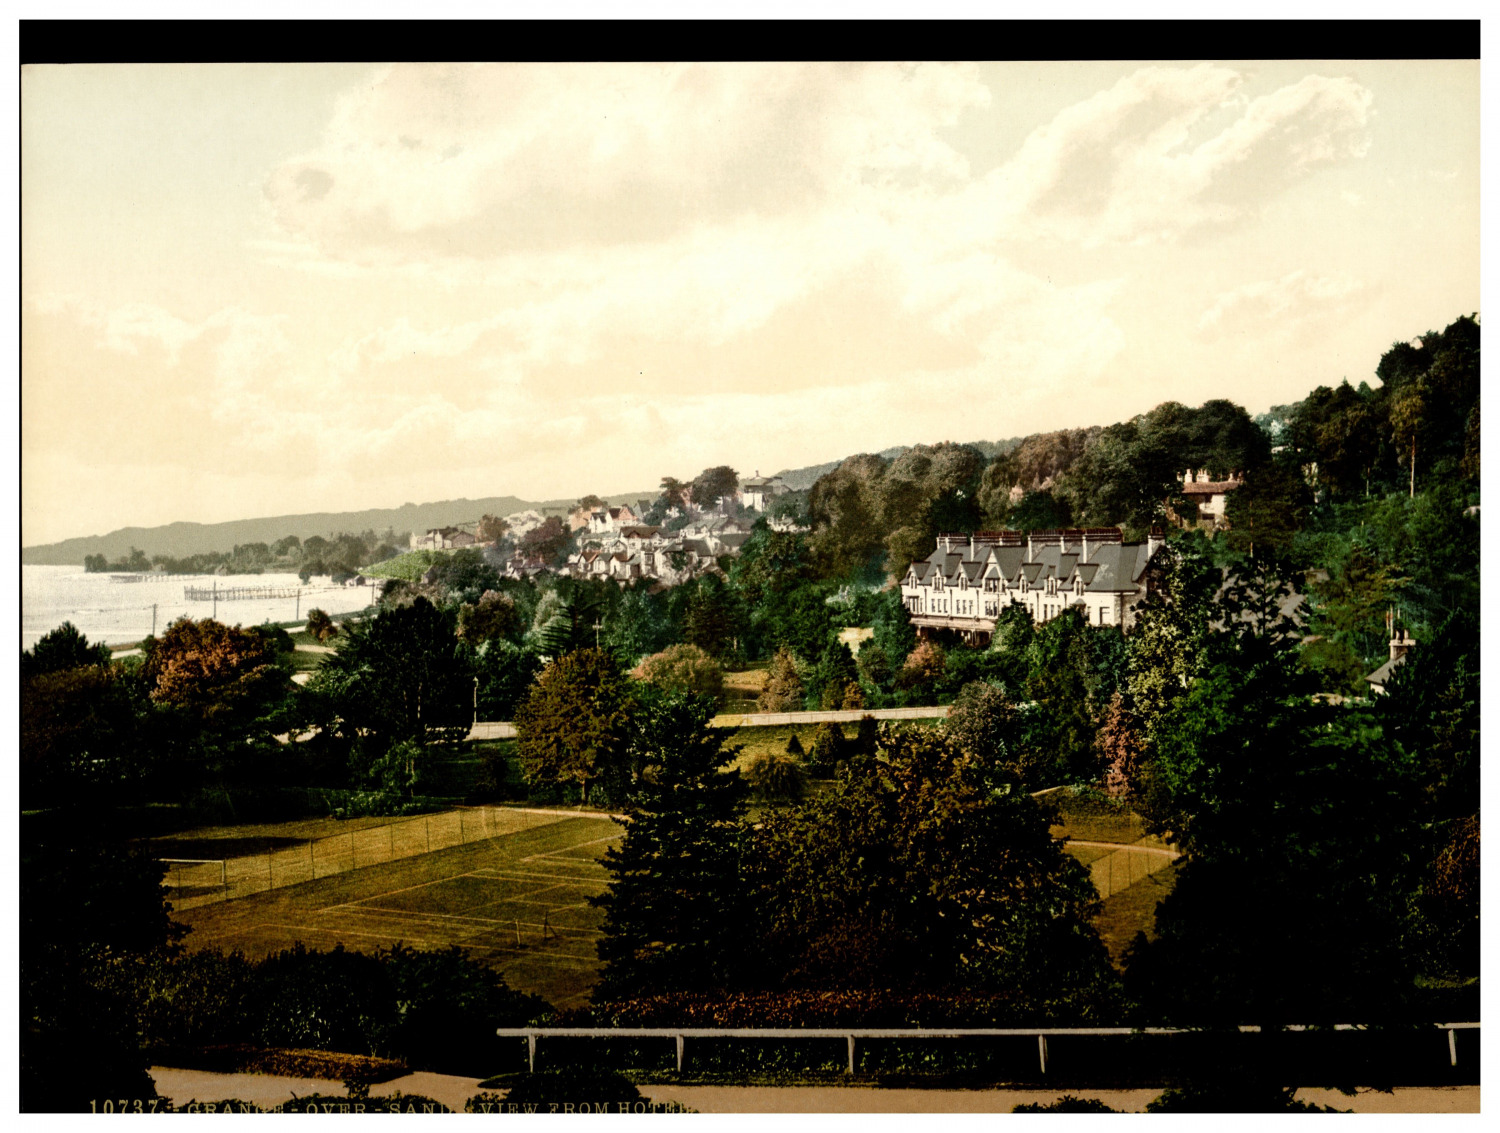 England. Grange-over-Sands from Hotel. Vintage Photochrome by P.Z, Photochrome 